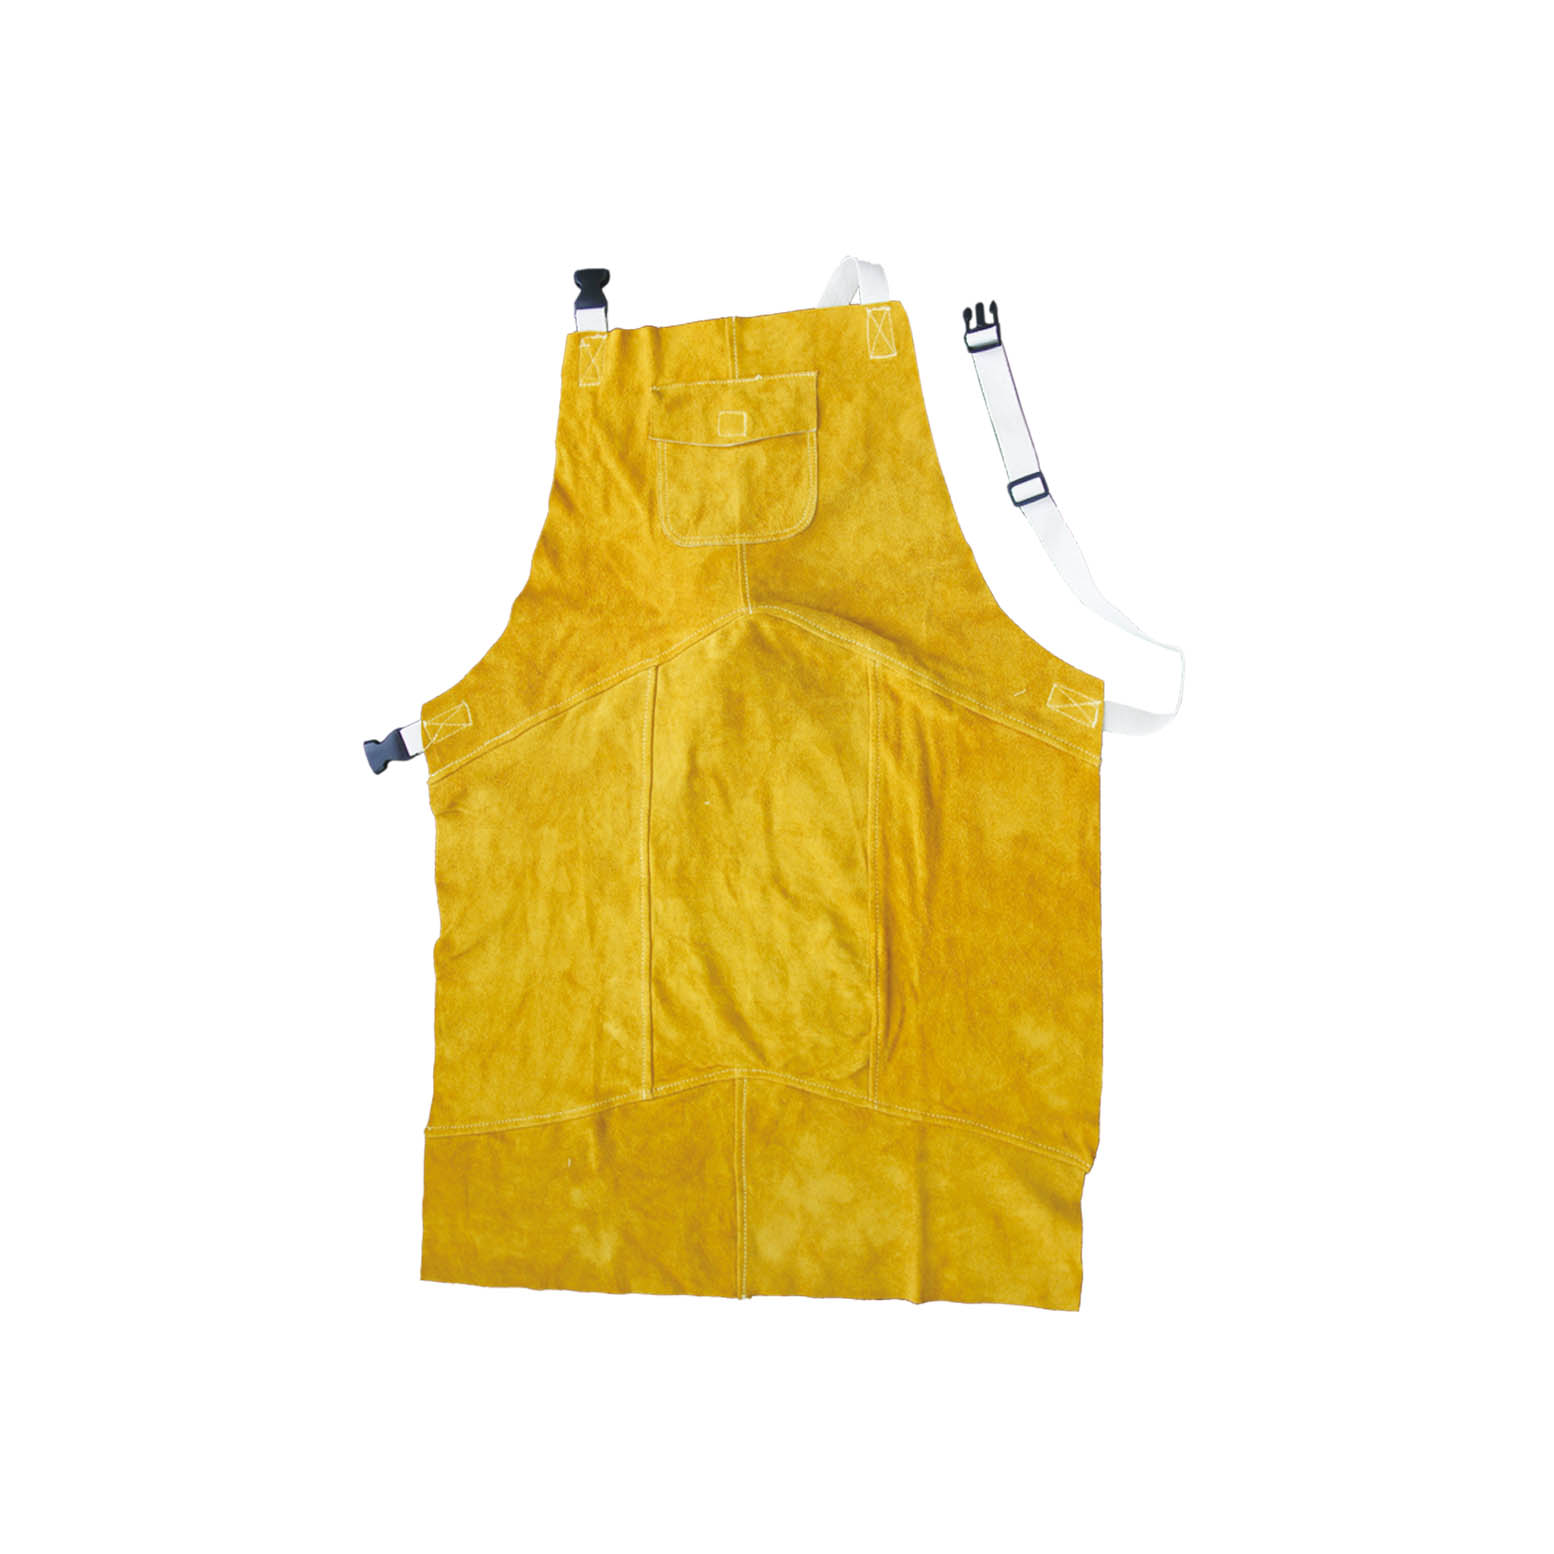 Welding Safety Apron